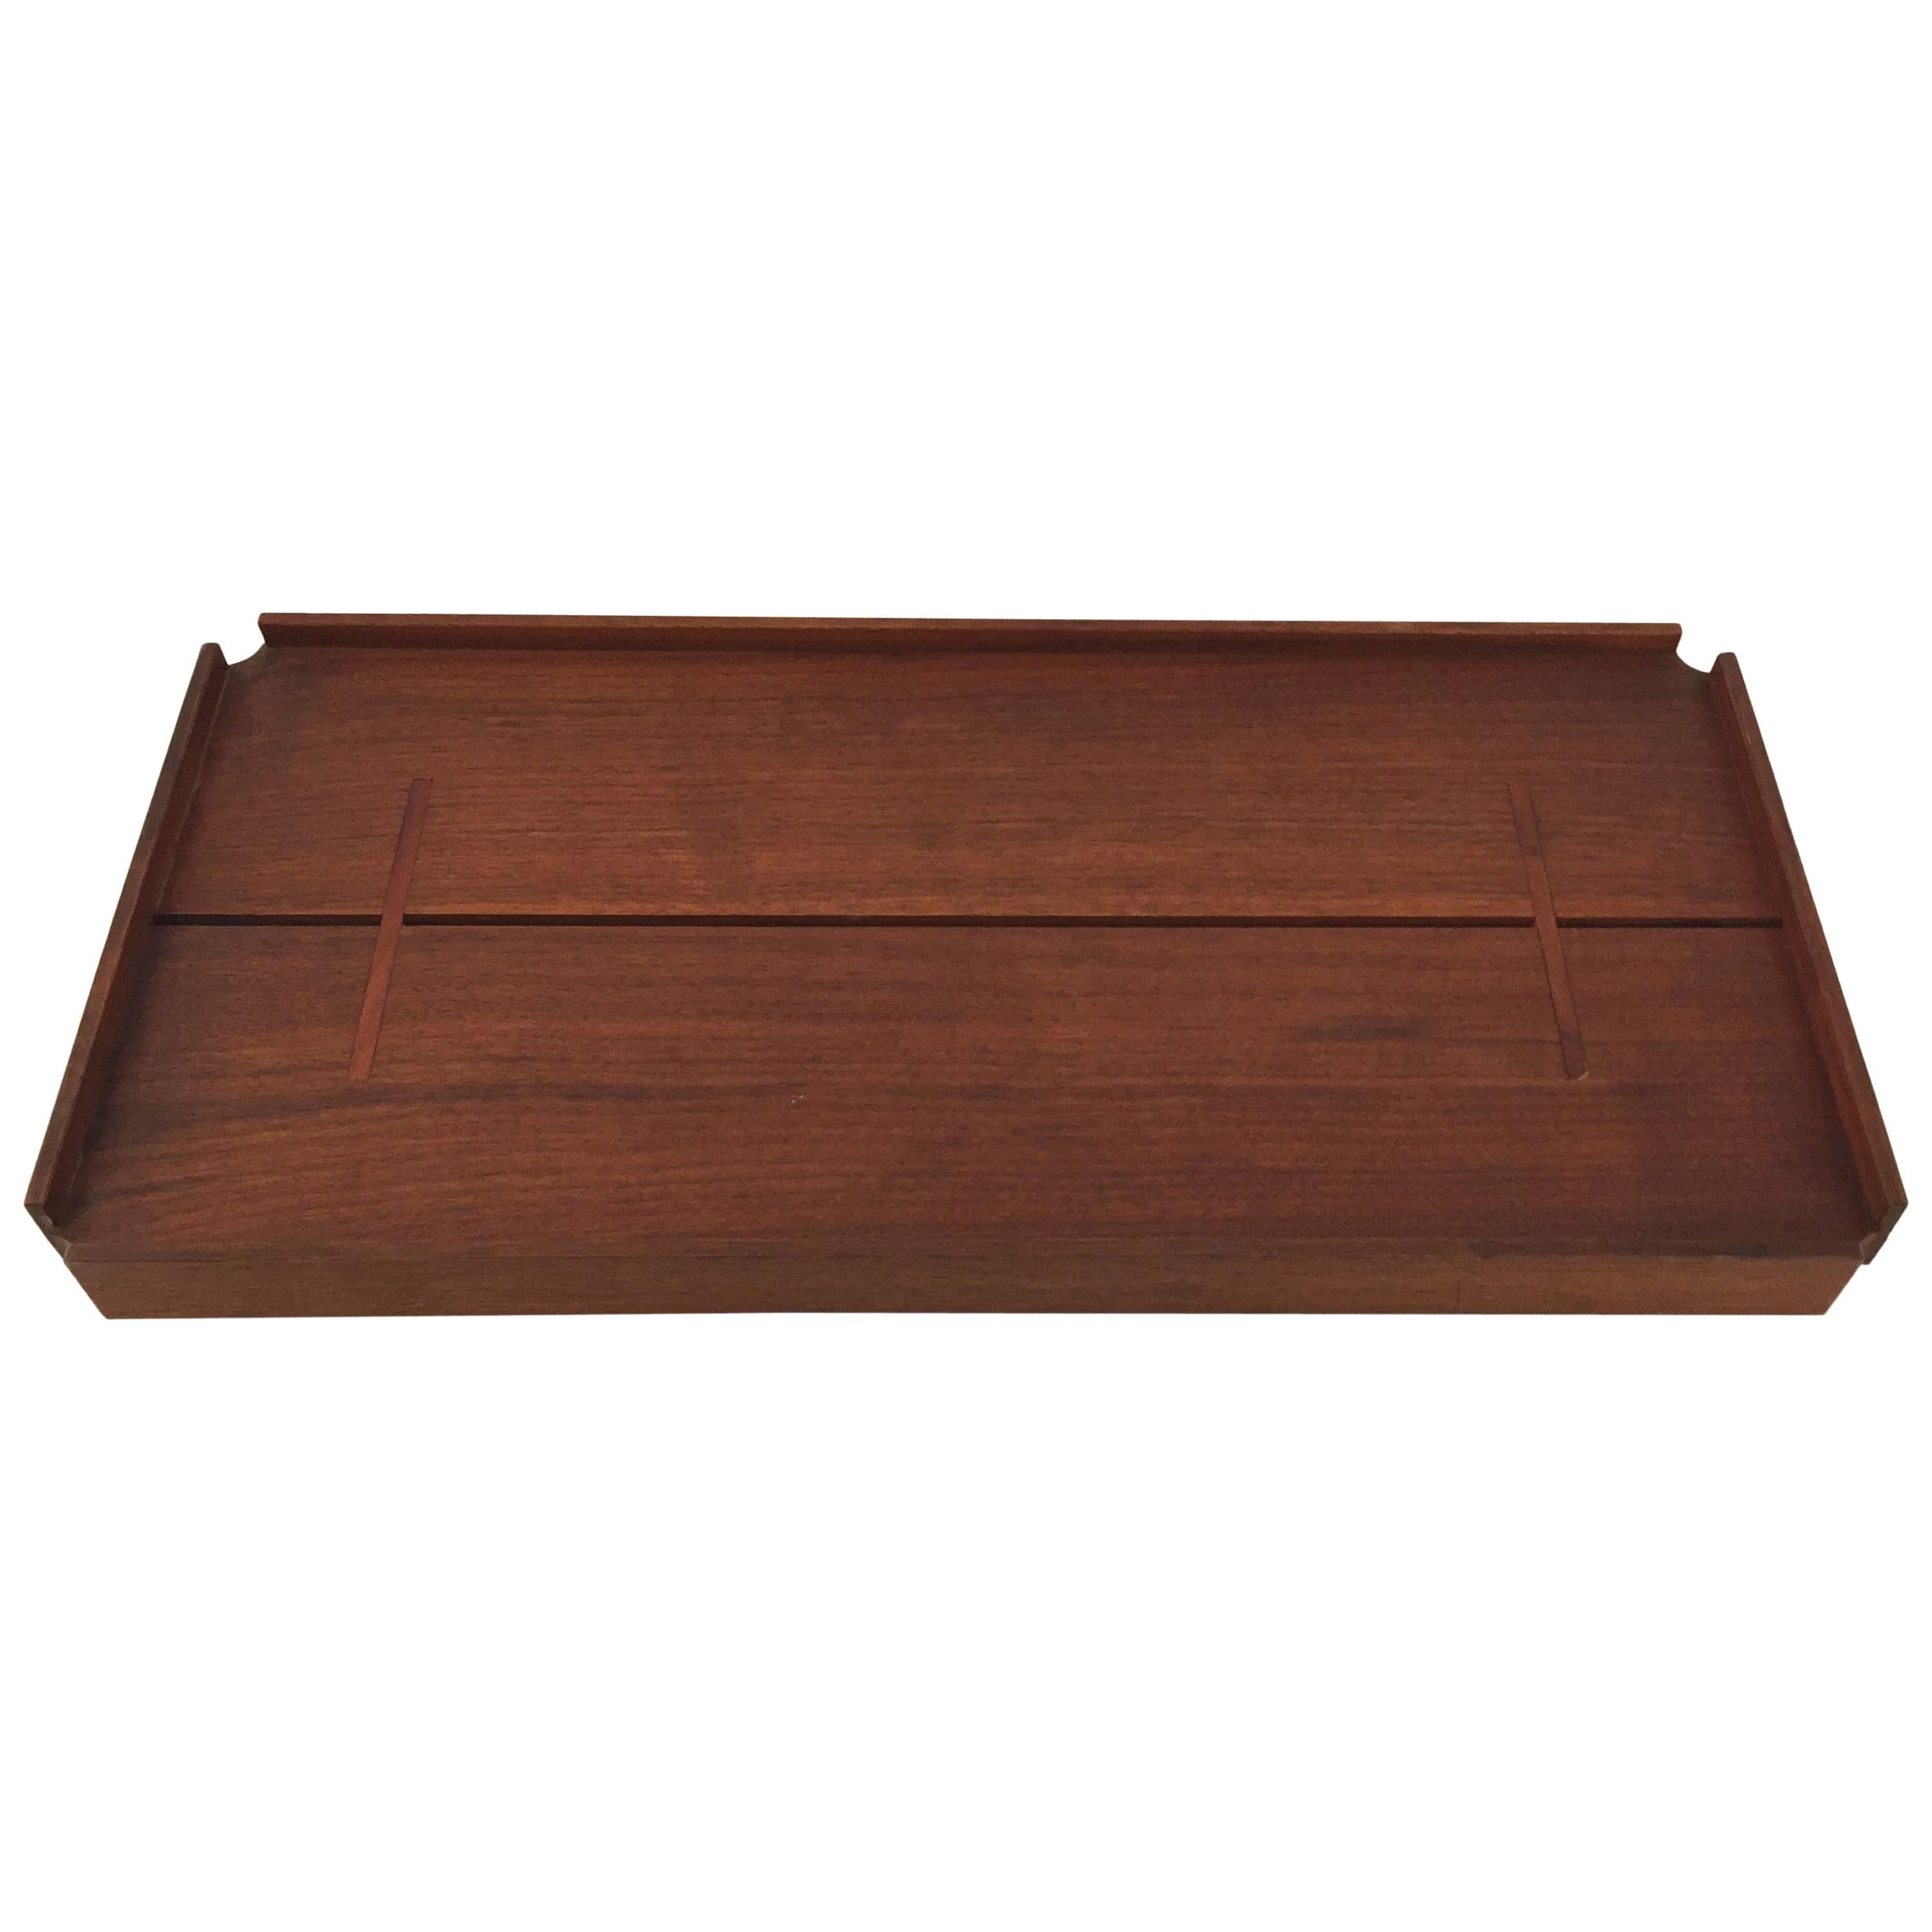 Solid Walnut Splined Top Serving Tray for Raymor